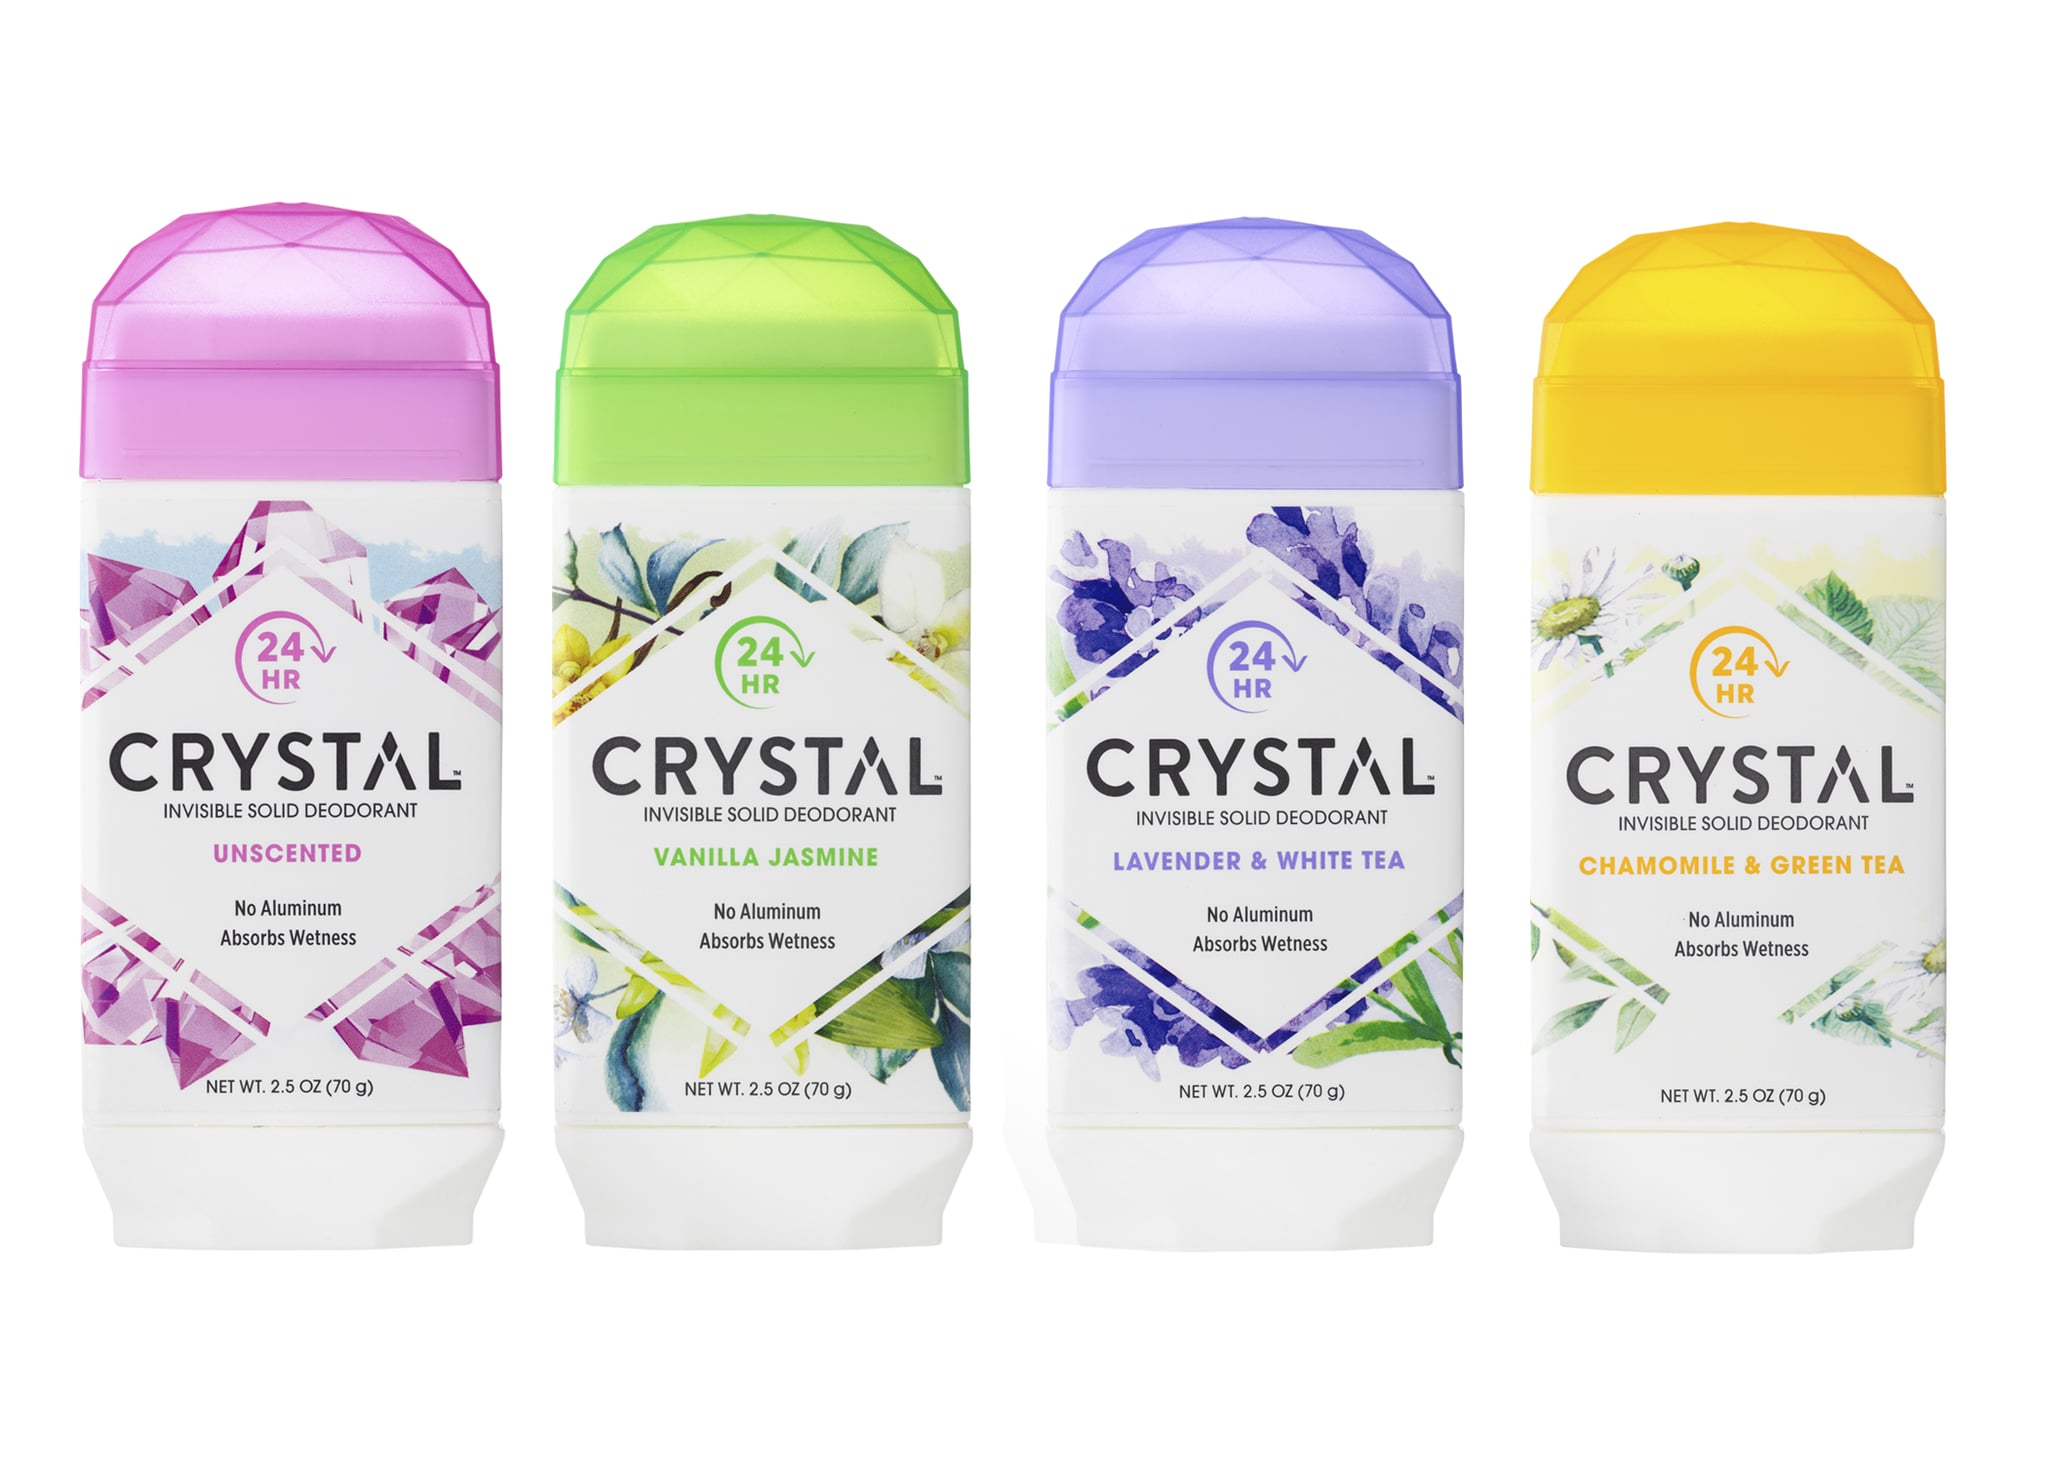 Ungdom Goneryl arsenal Crystal Invisible Solid Stick Deodorant Review | POPSUGAR Beauty UK